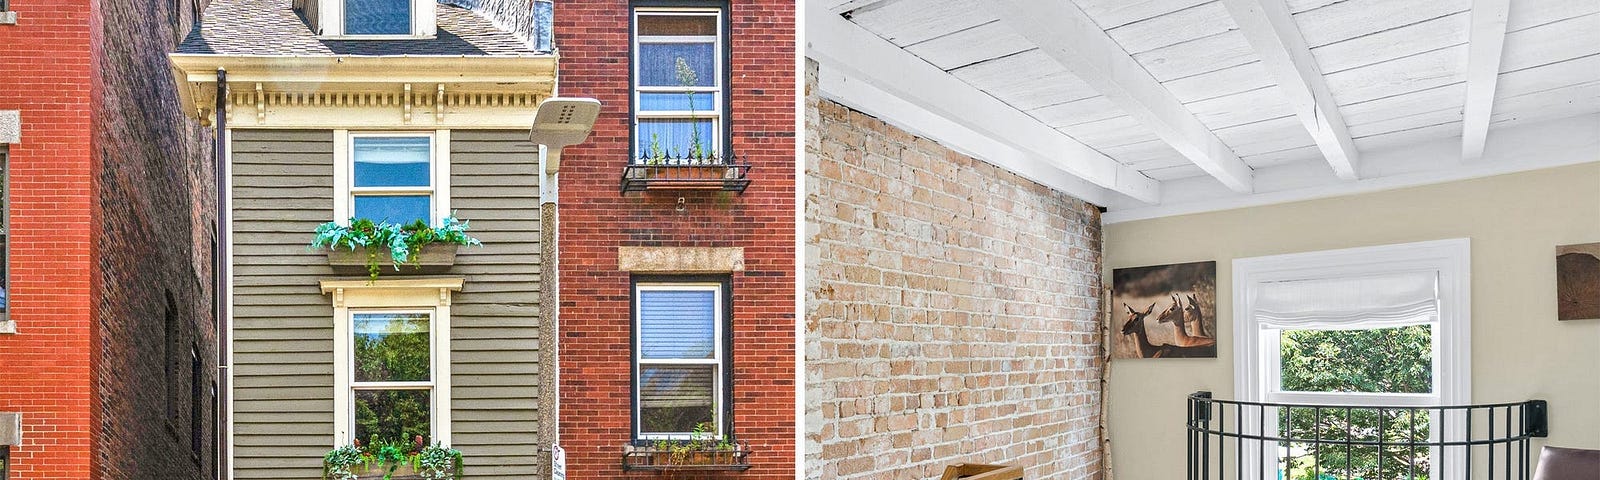 The exterior (left) and interior (right) of the skinniest home in Boston.